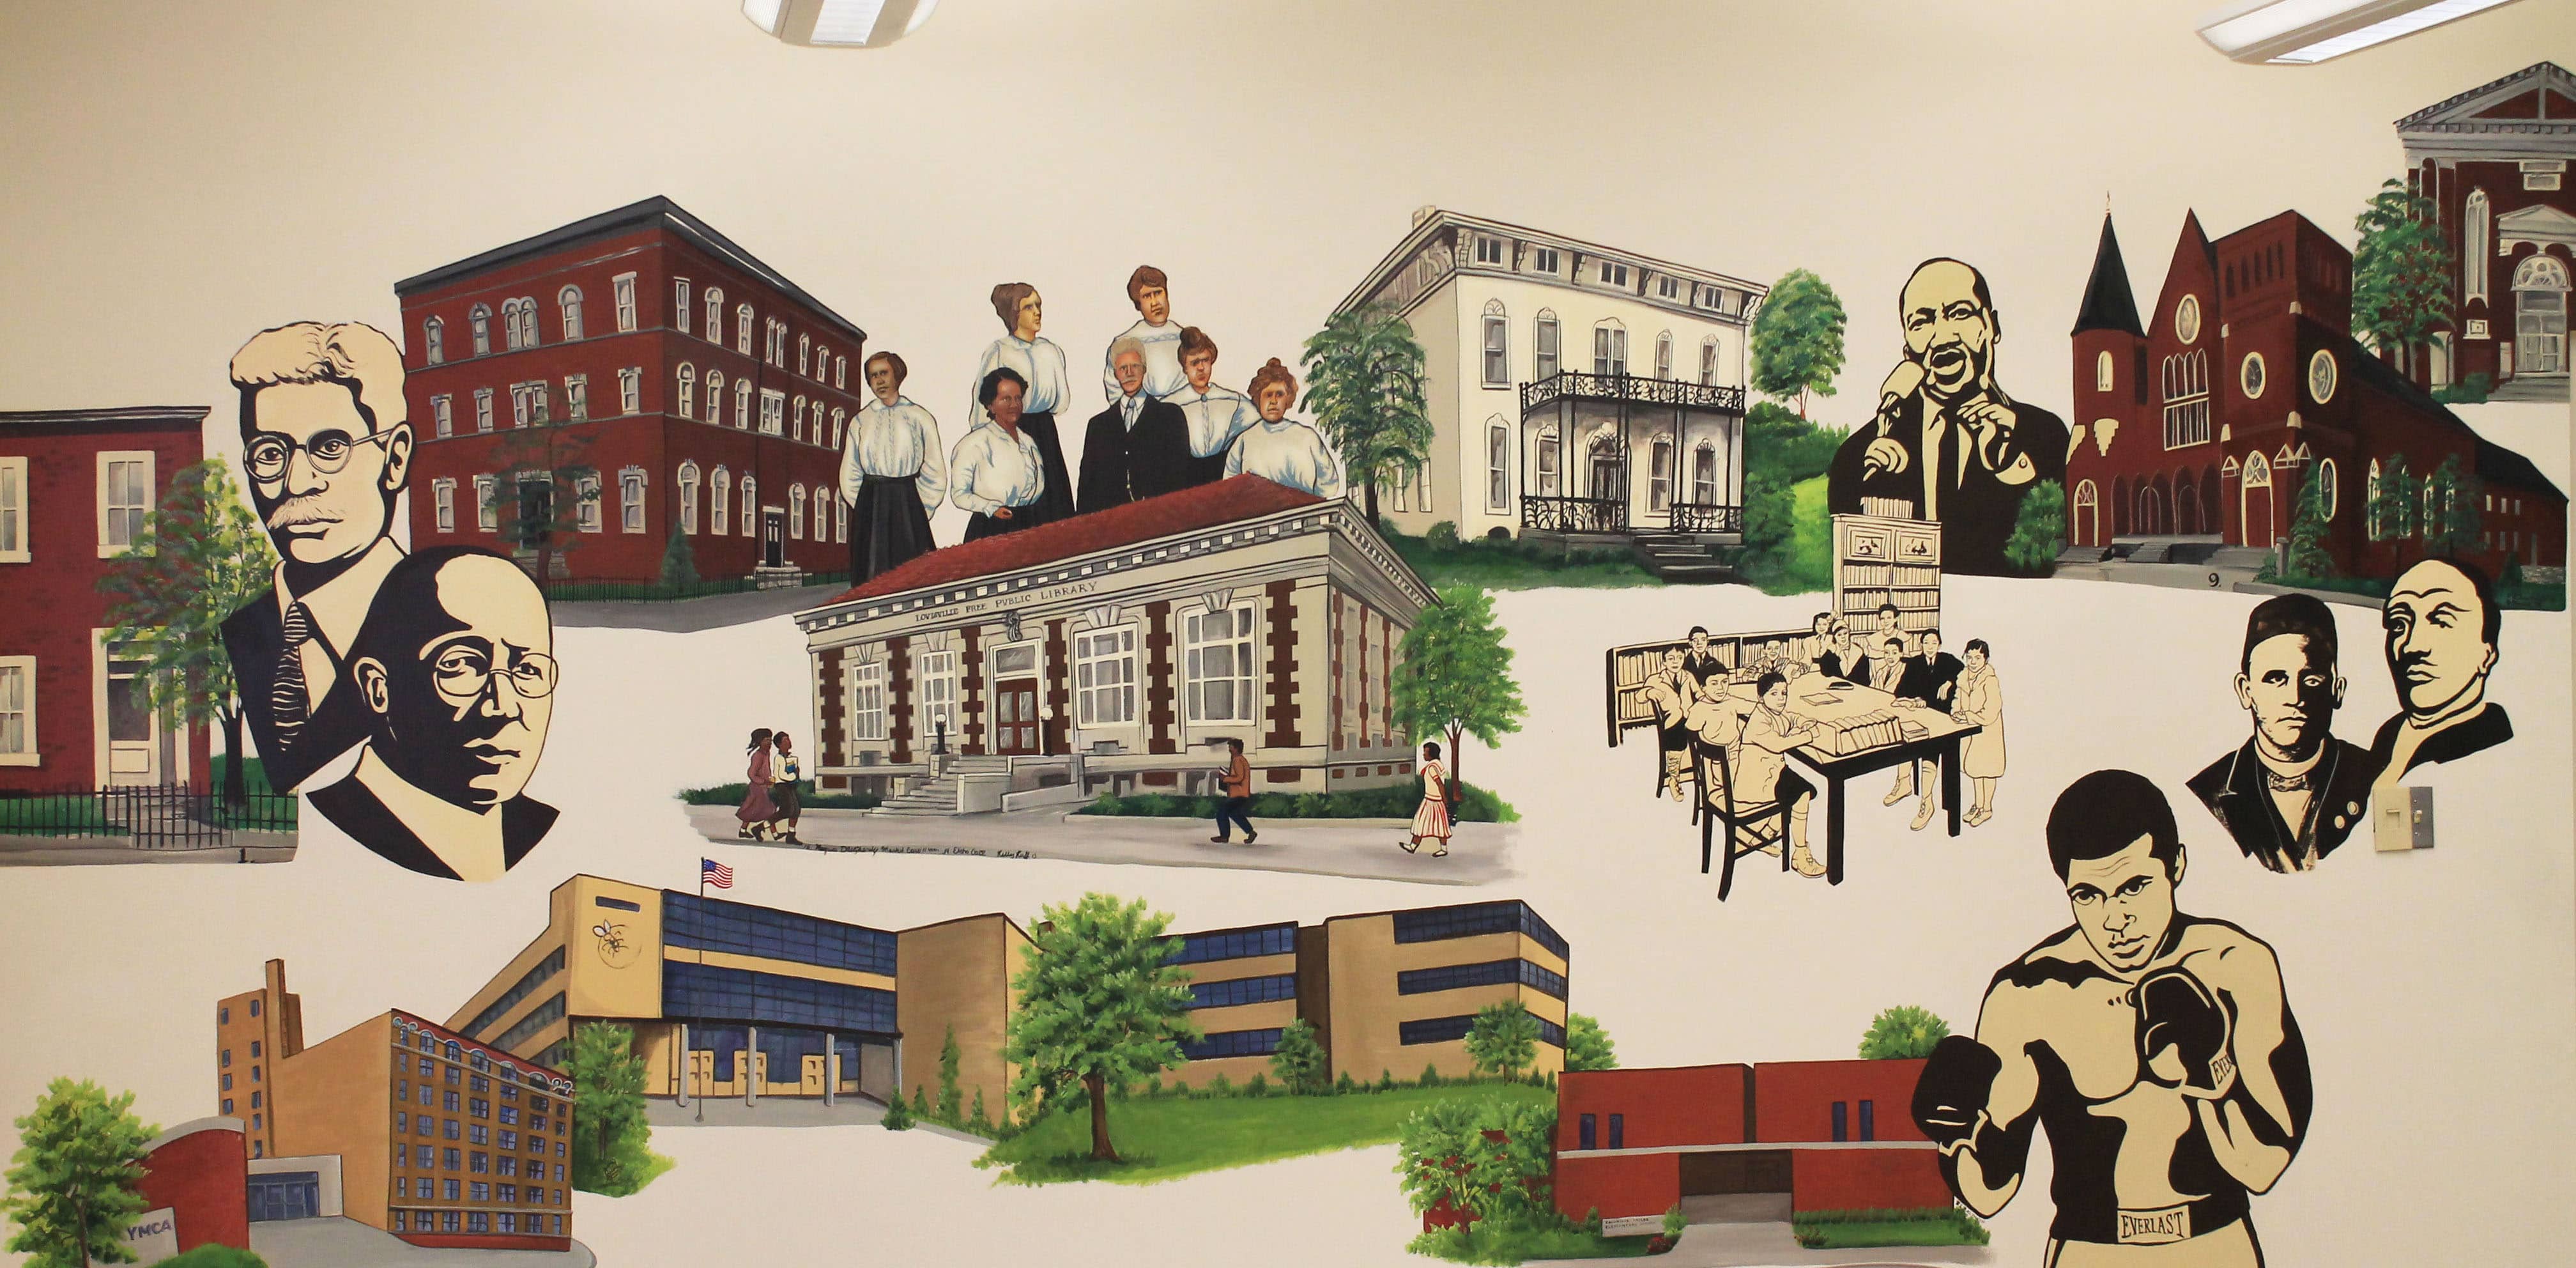 Mural commemorating Western's 90th anniversary